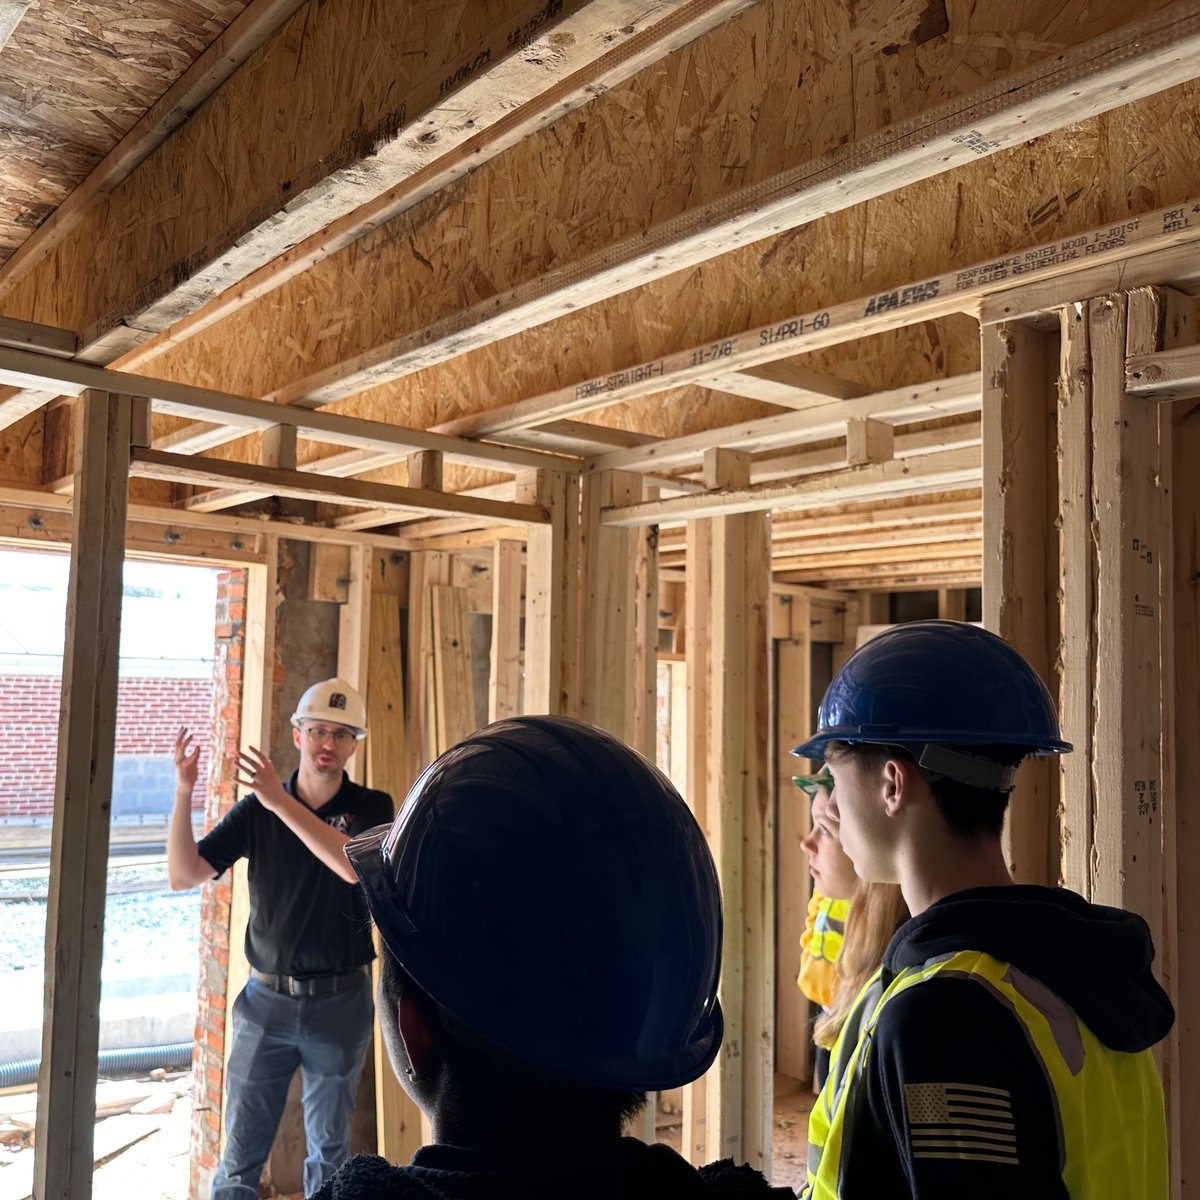 LYNX scholars learned how architecture, engineering, and construction, “collaborate on a project to make everything work together” when they visited an in-progress build in downtown Frederick! @FCPSMaryland